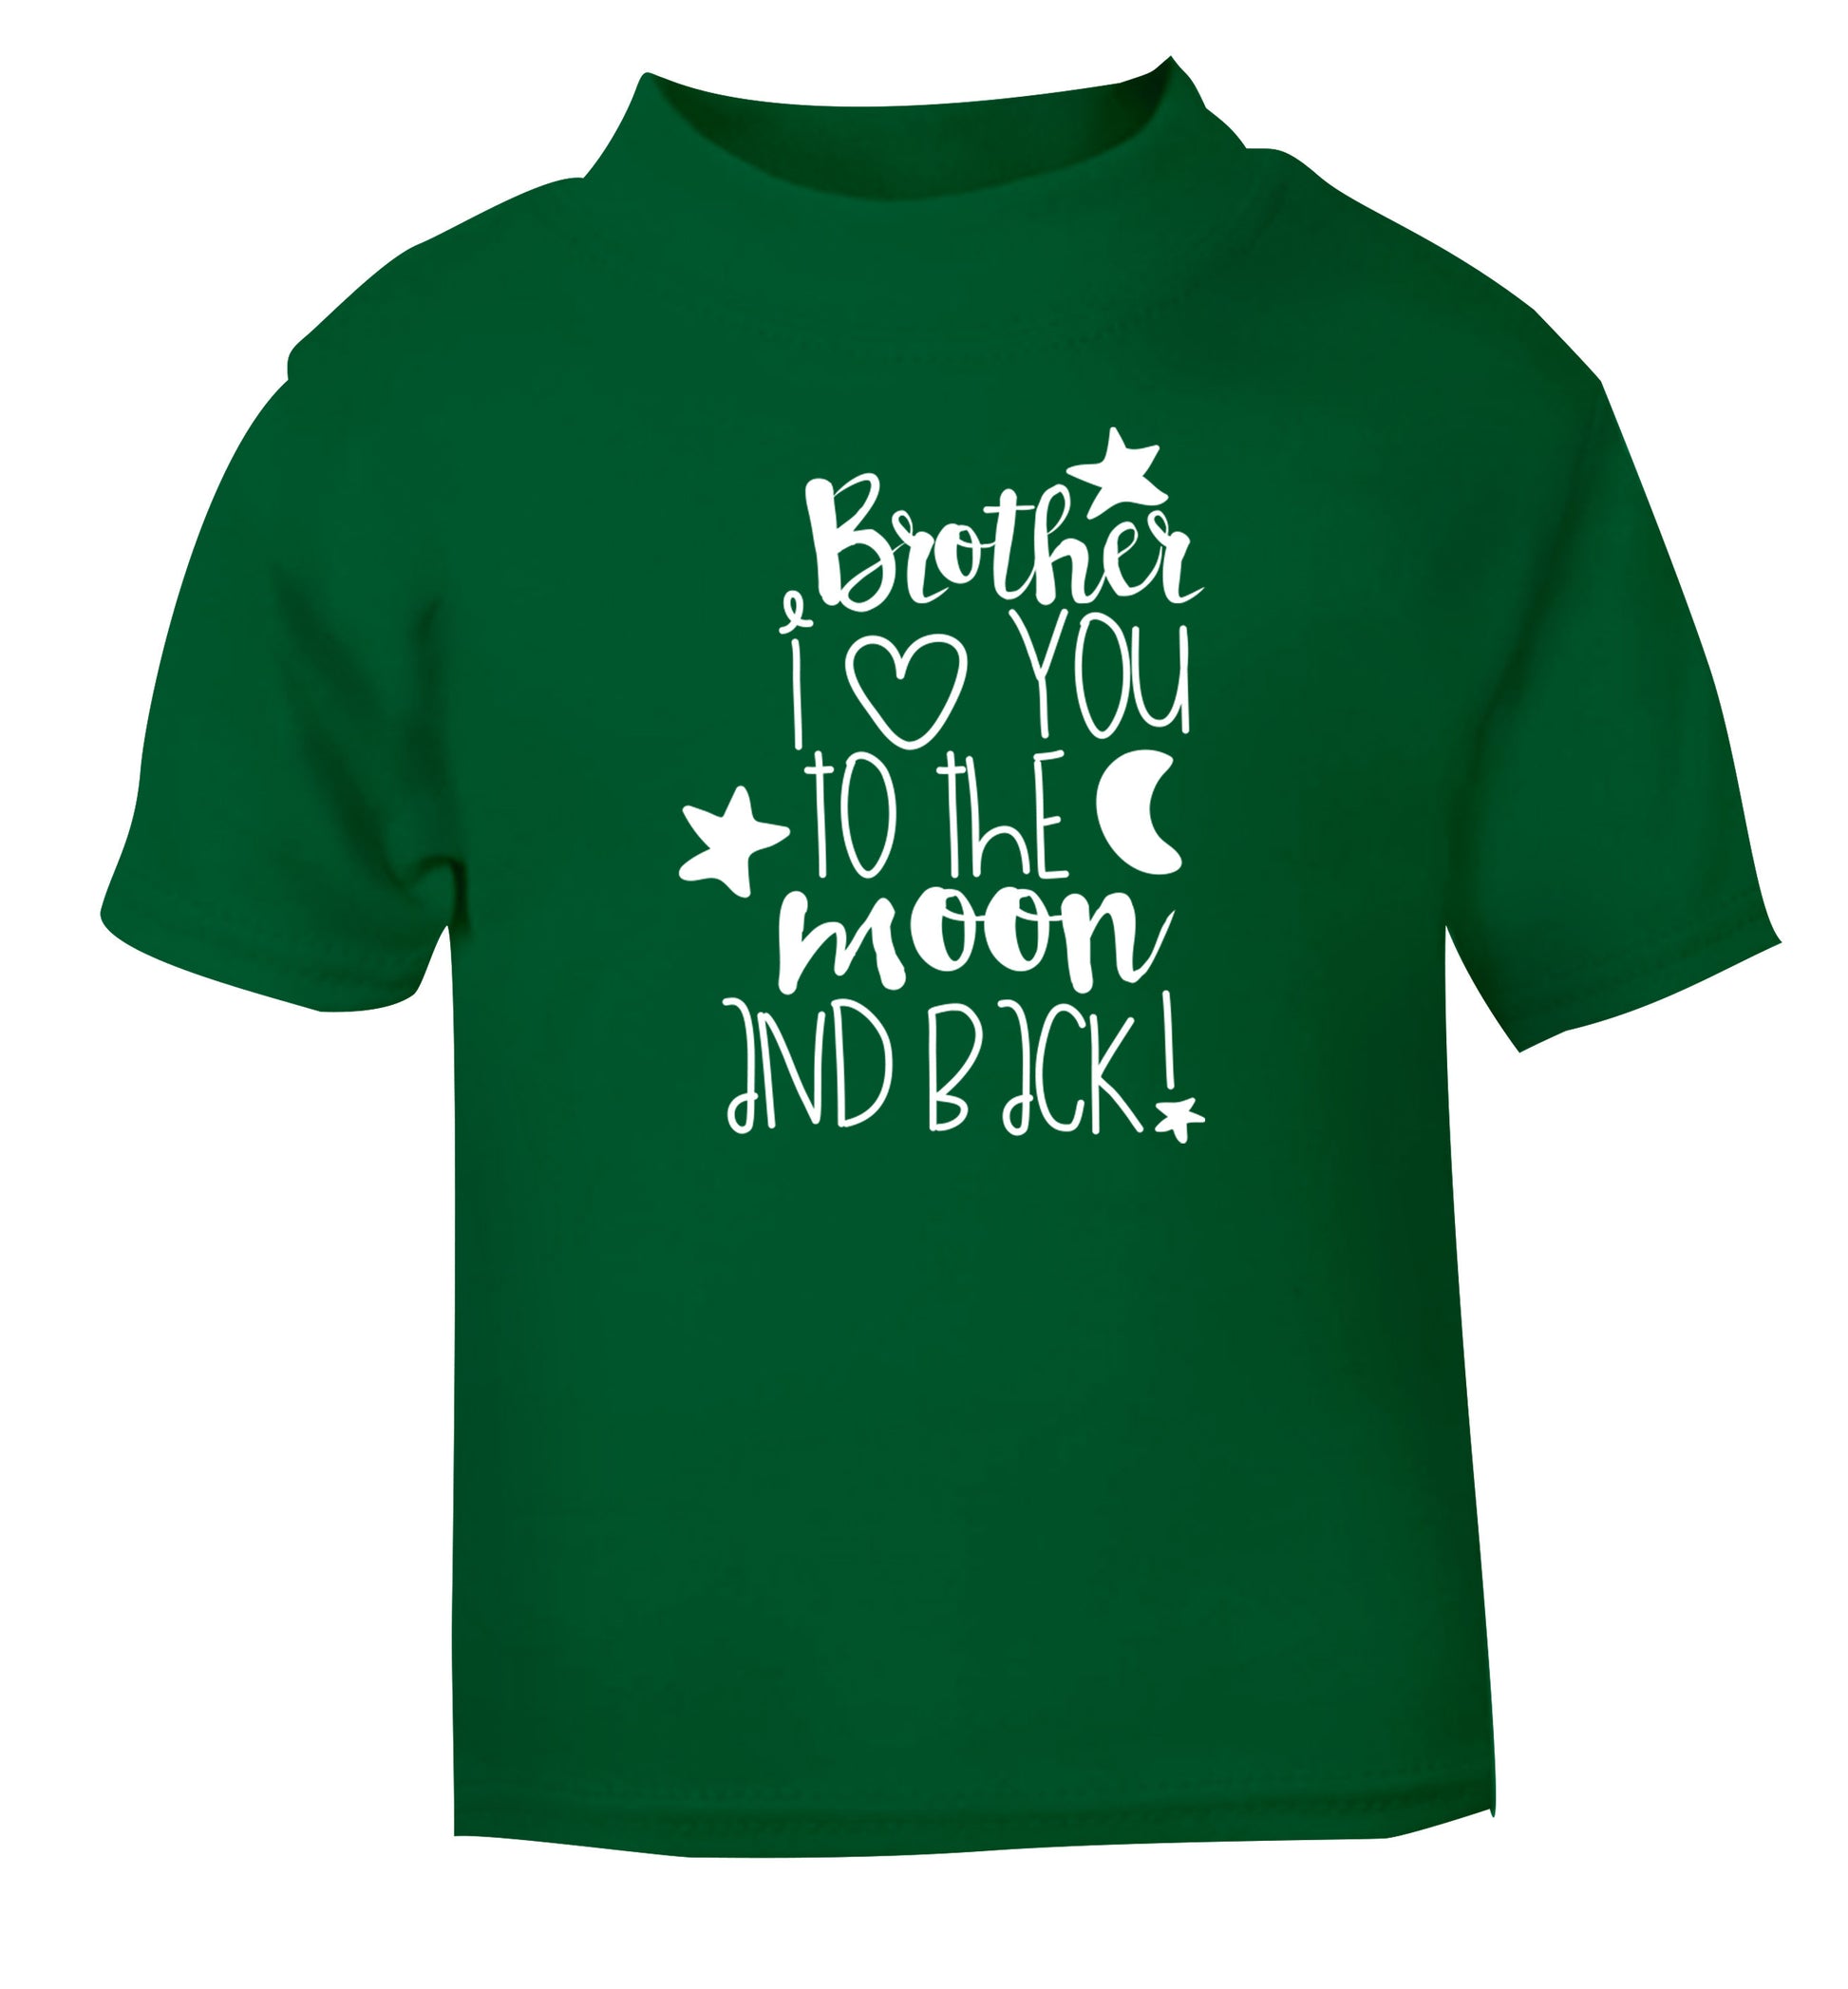 Brother I love you to the moon and back green Baby Toddler Tshirt 2 Years